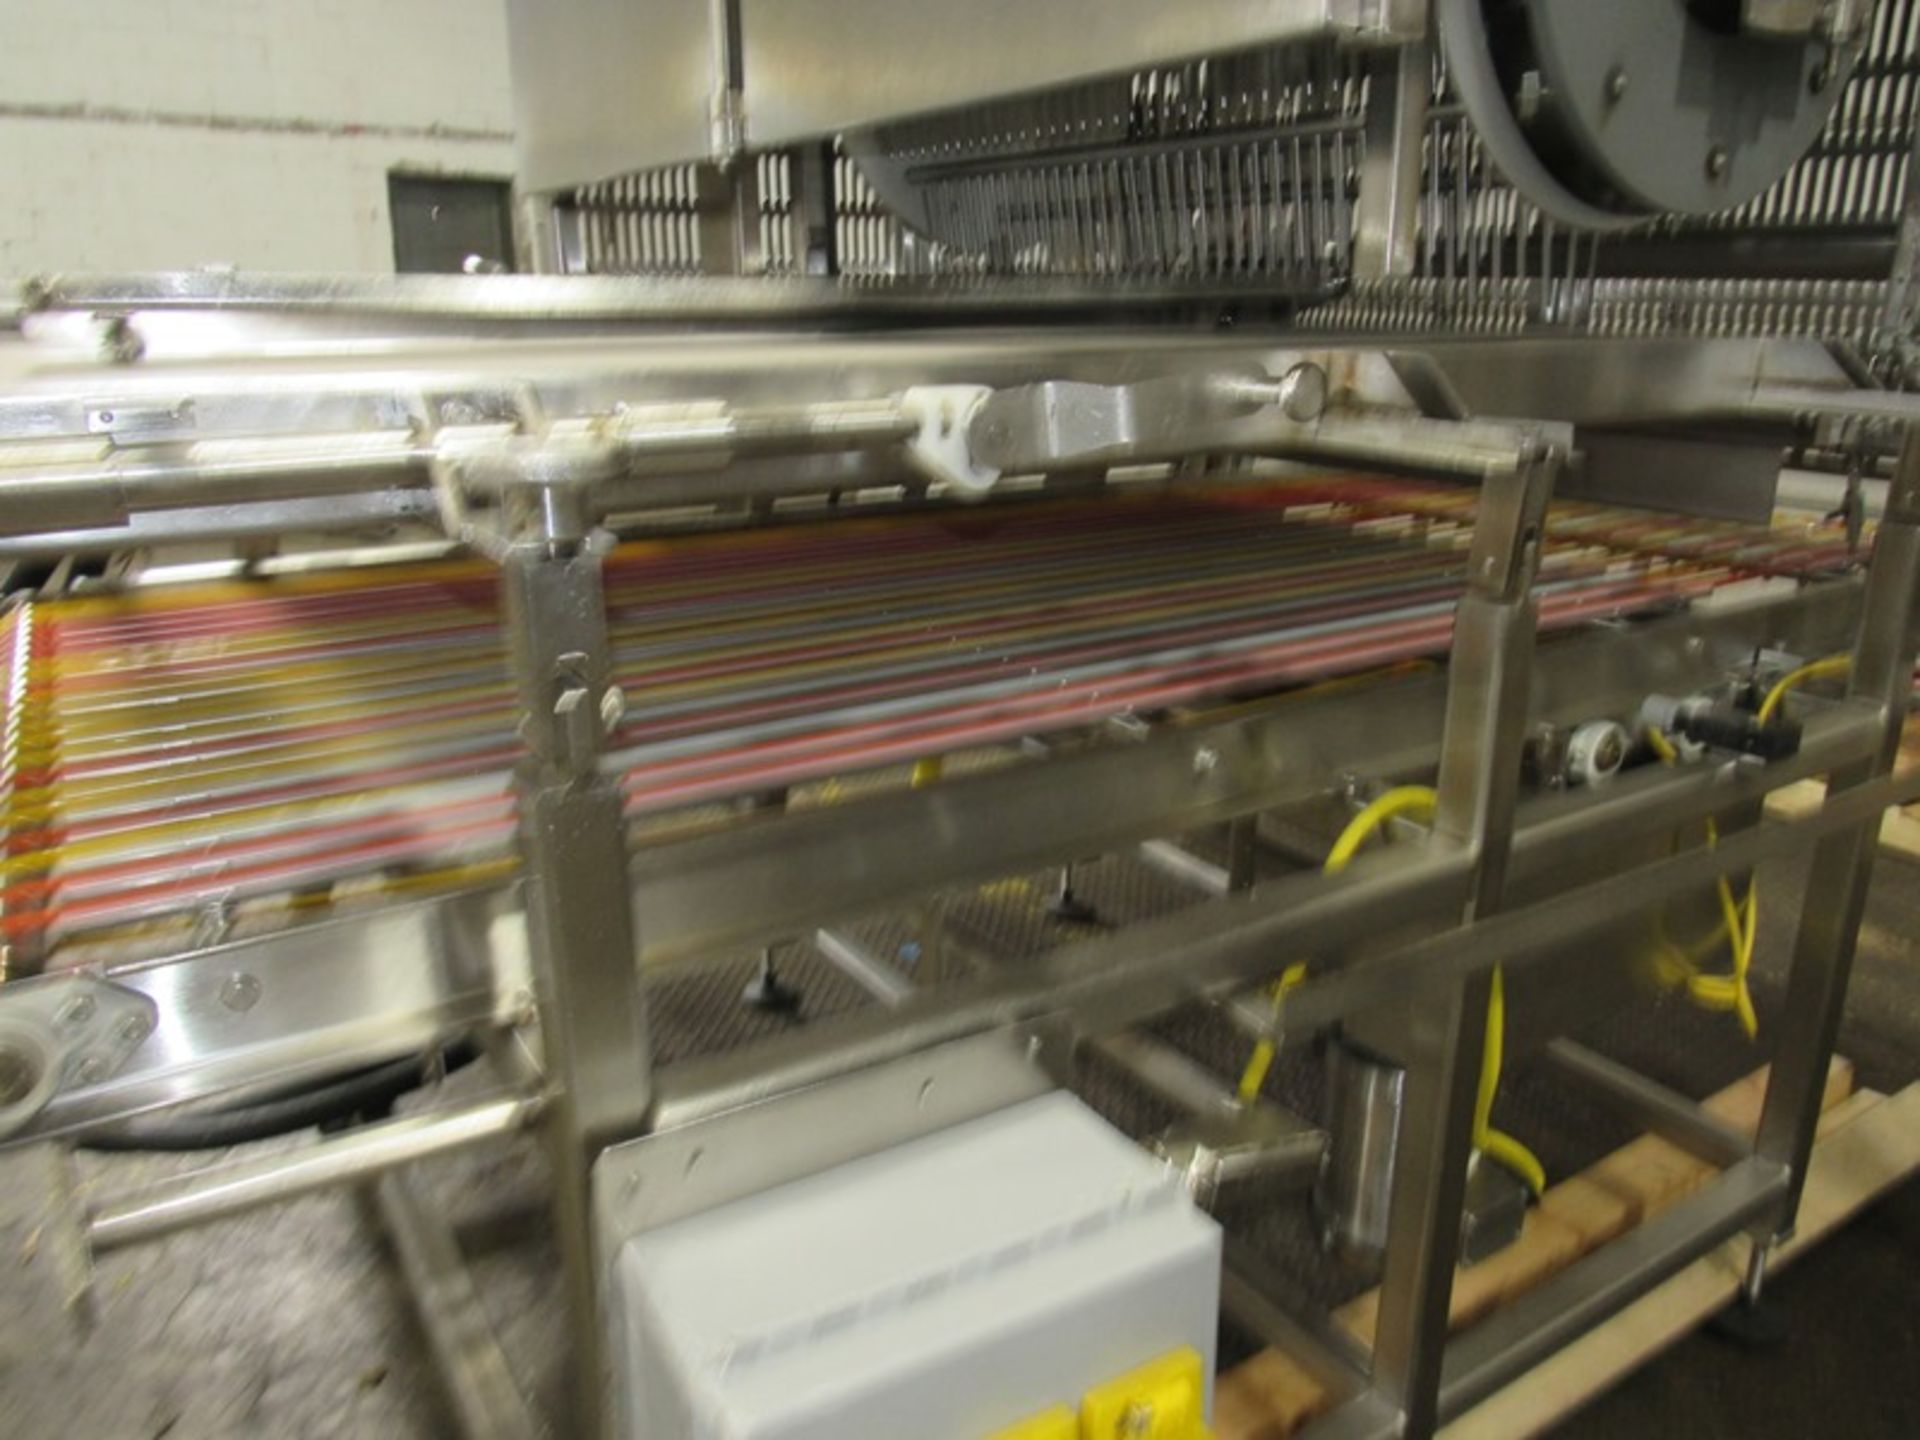 Pizzamatic Corp. Cheese Water Fall, 45" W X 7' L conveyor, 240 volts, 3 phase, Located in Plano, - Image 9 of 9